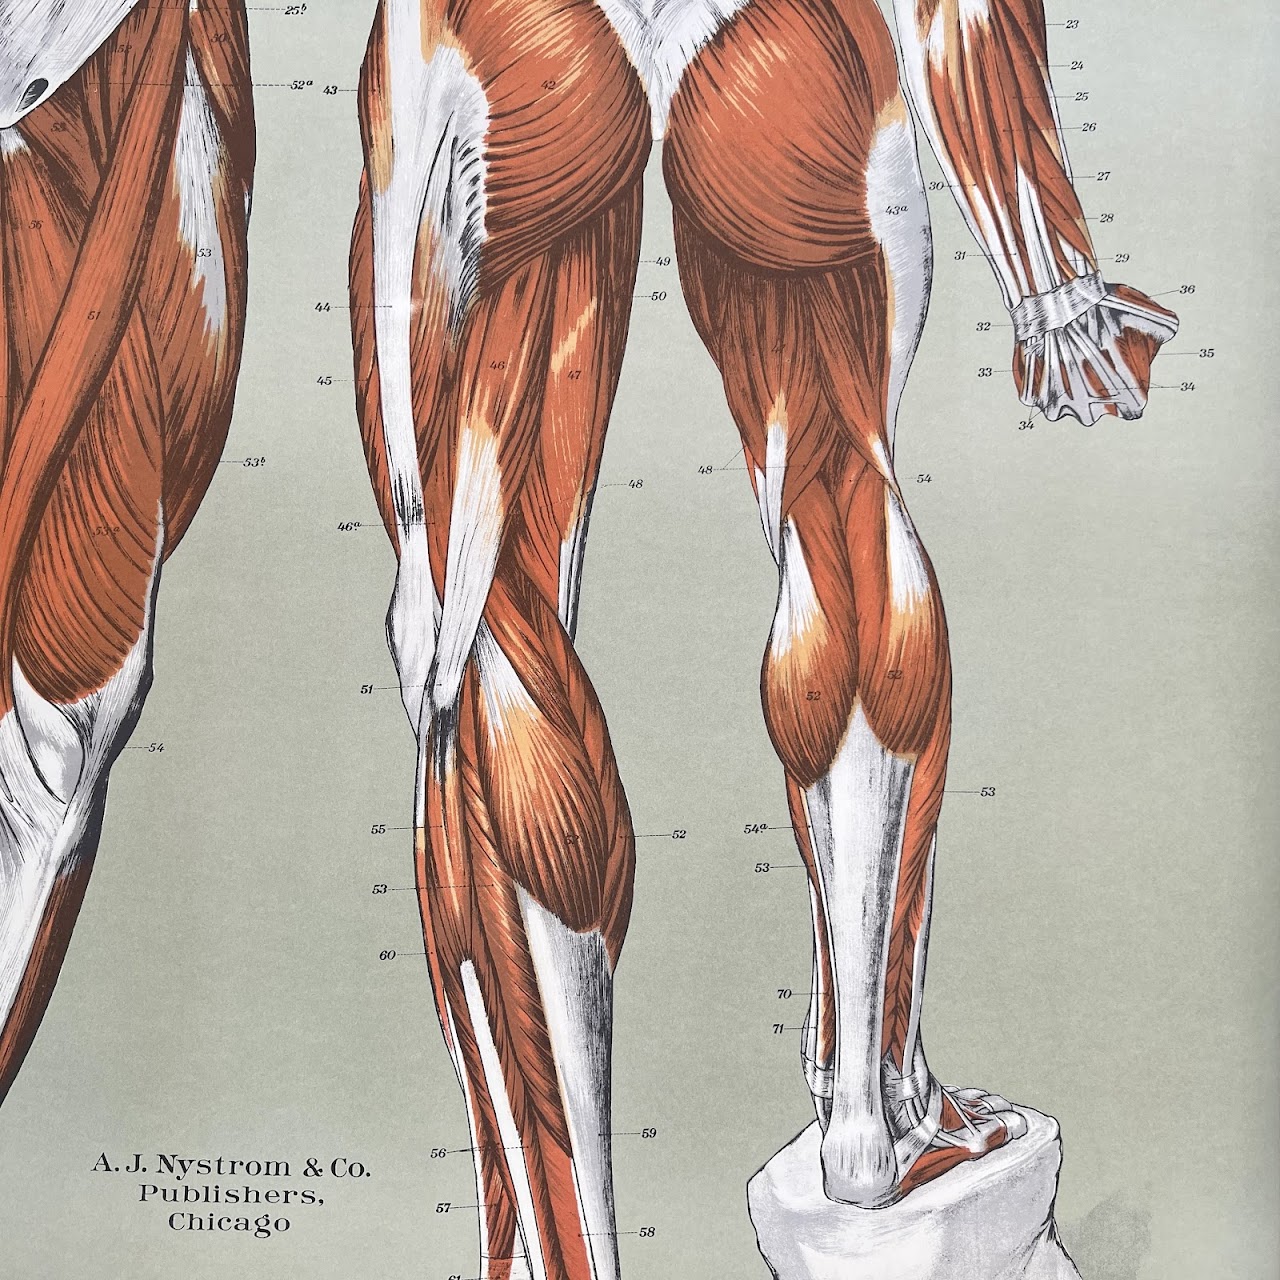 American Frohse Max Brodel Muscular System Anatomy Chart, 1918